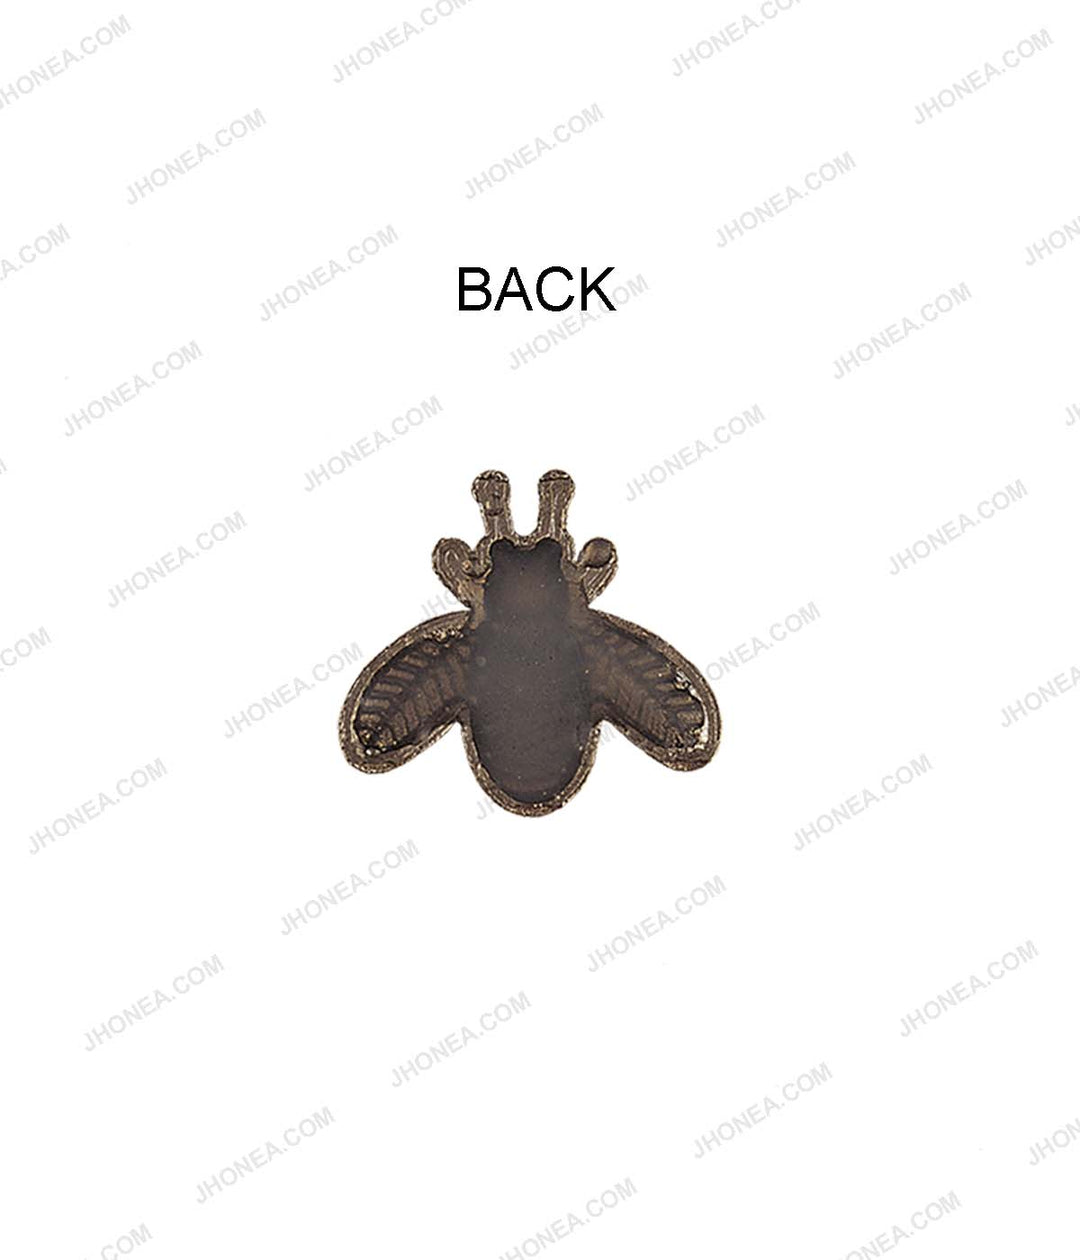 Engraved Honeybee Design Iron On Hot Fix for Suits/Blazers